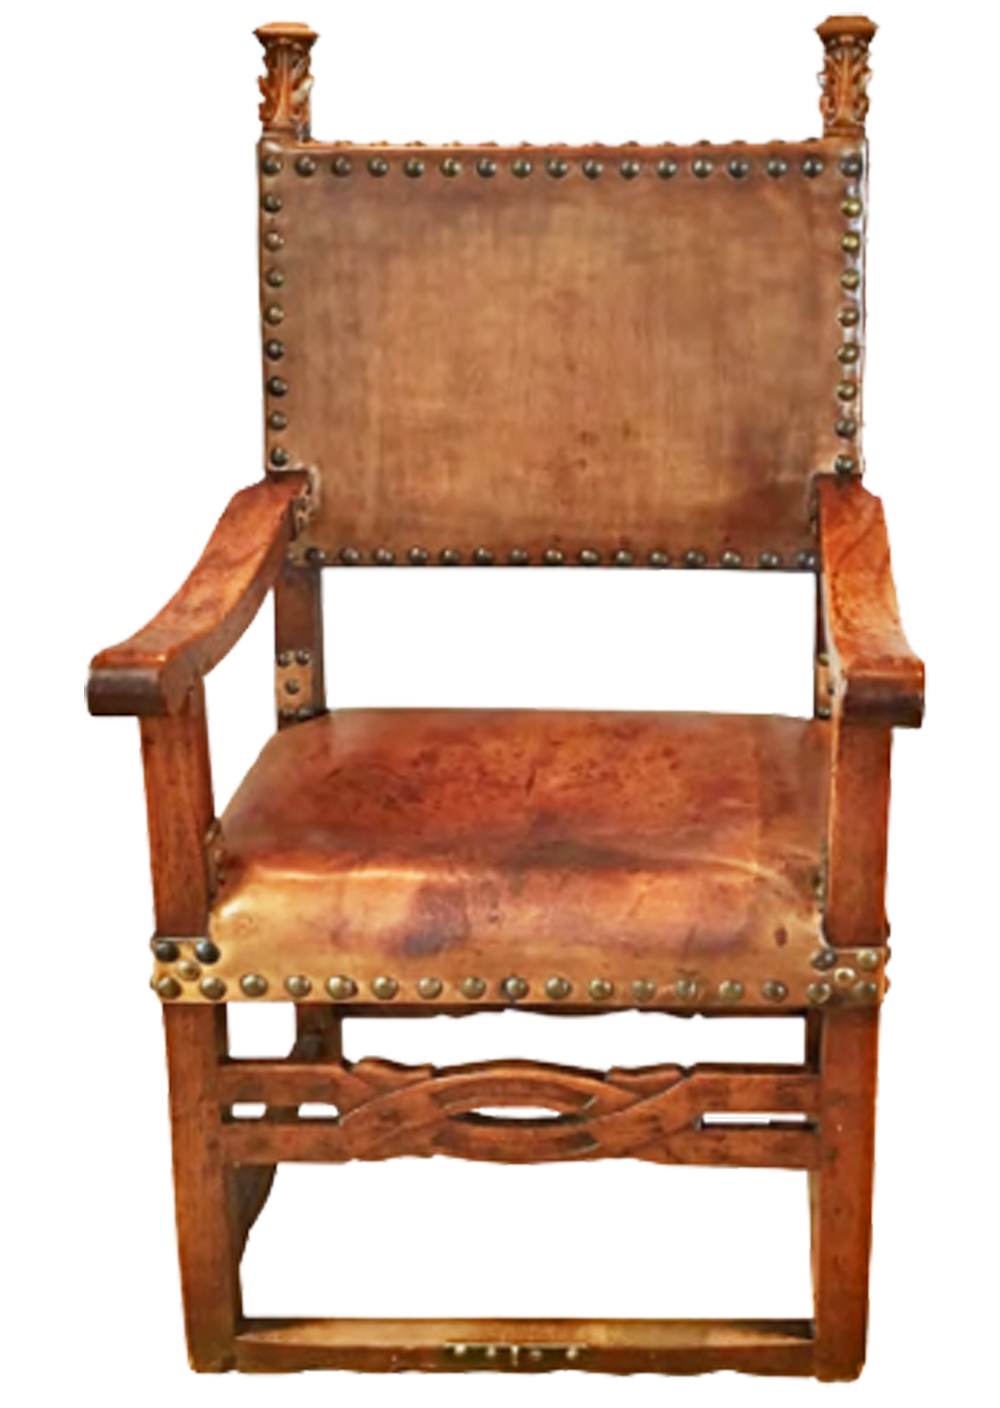 A 17th Century Continental Walnut and Leather Baroque Armchair No. 4754